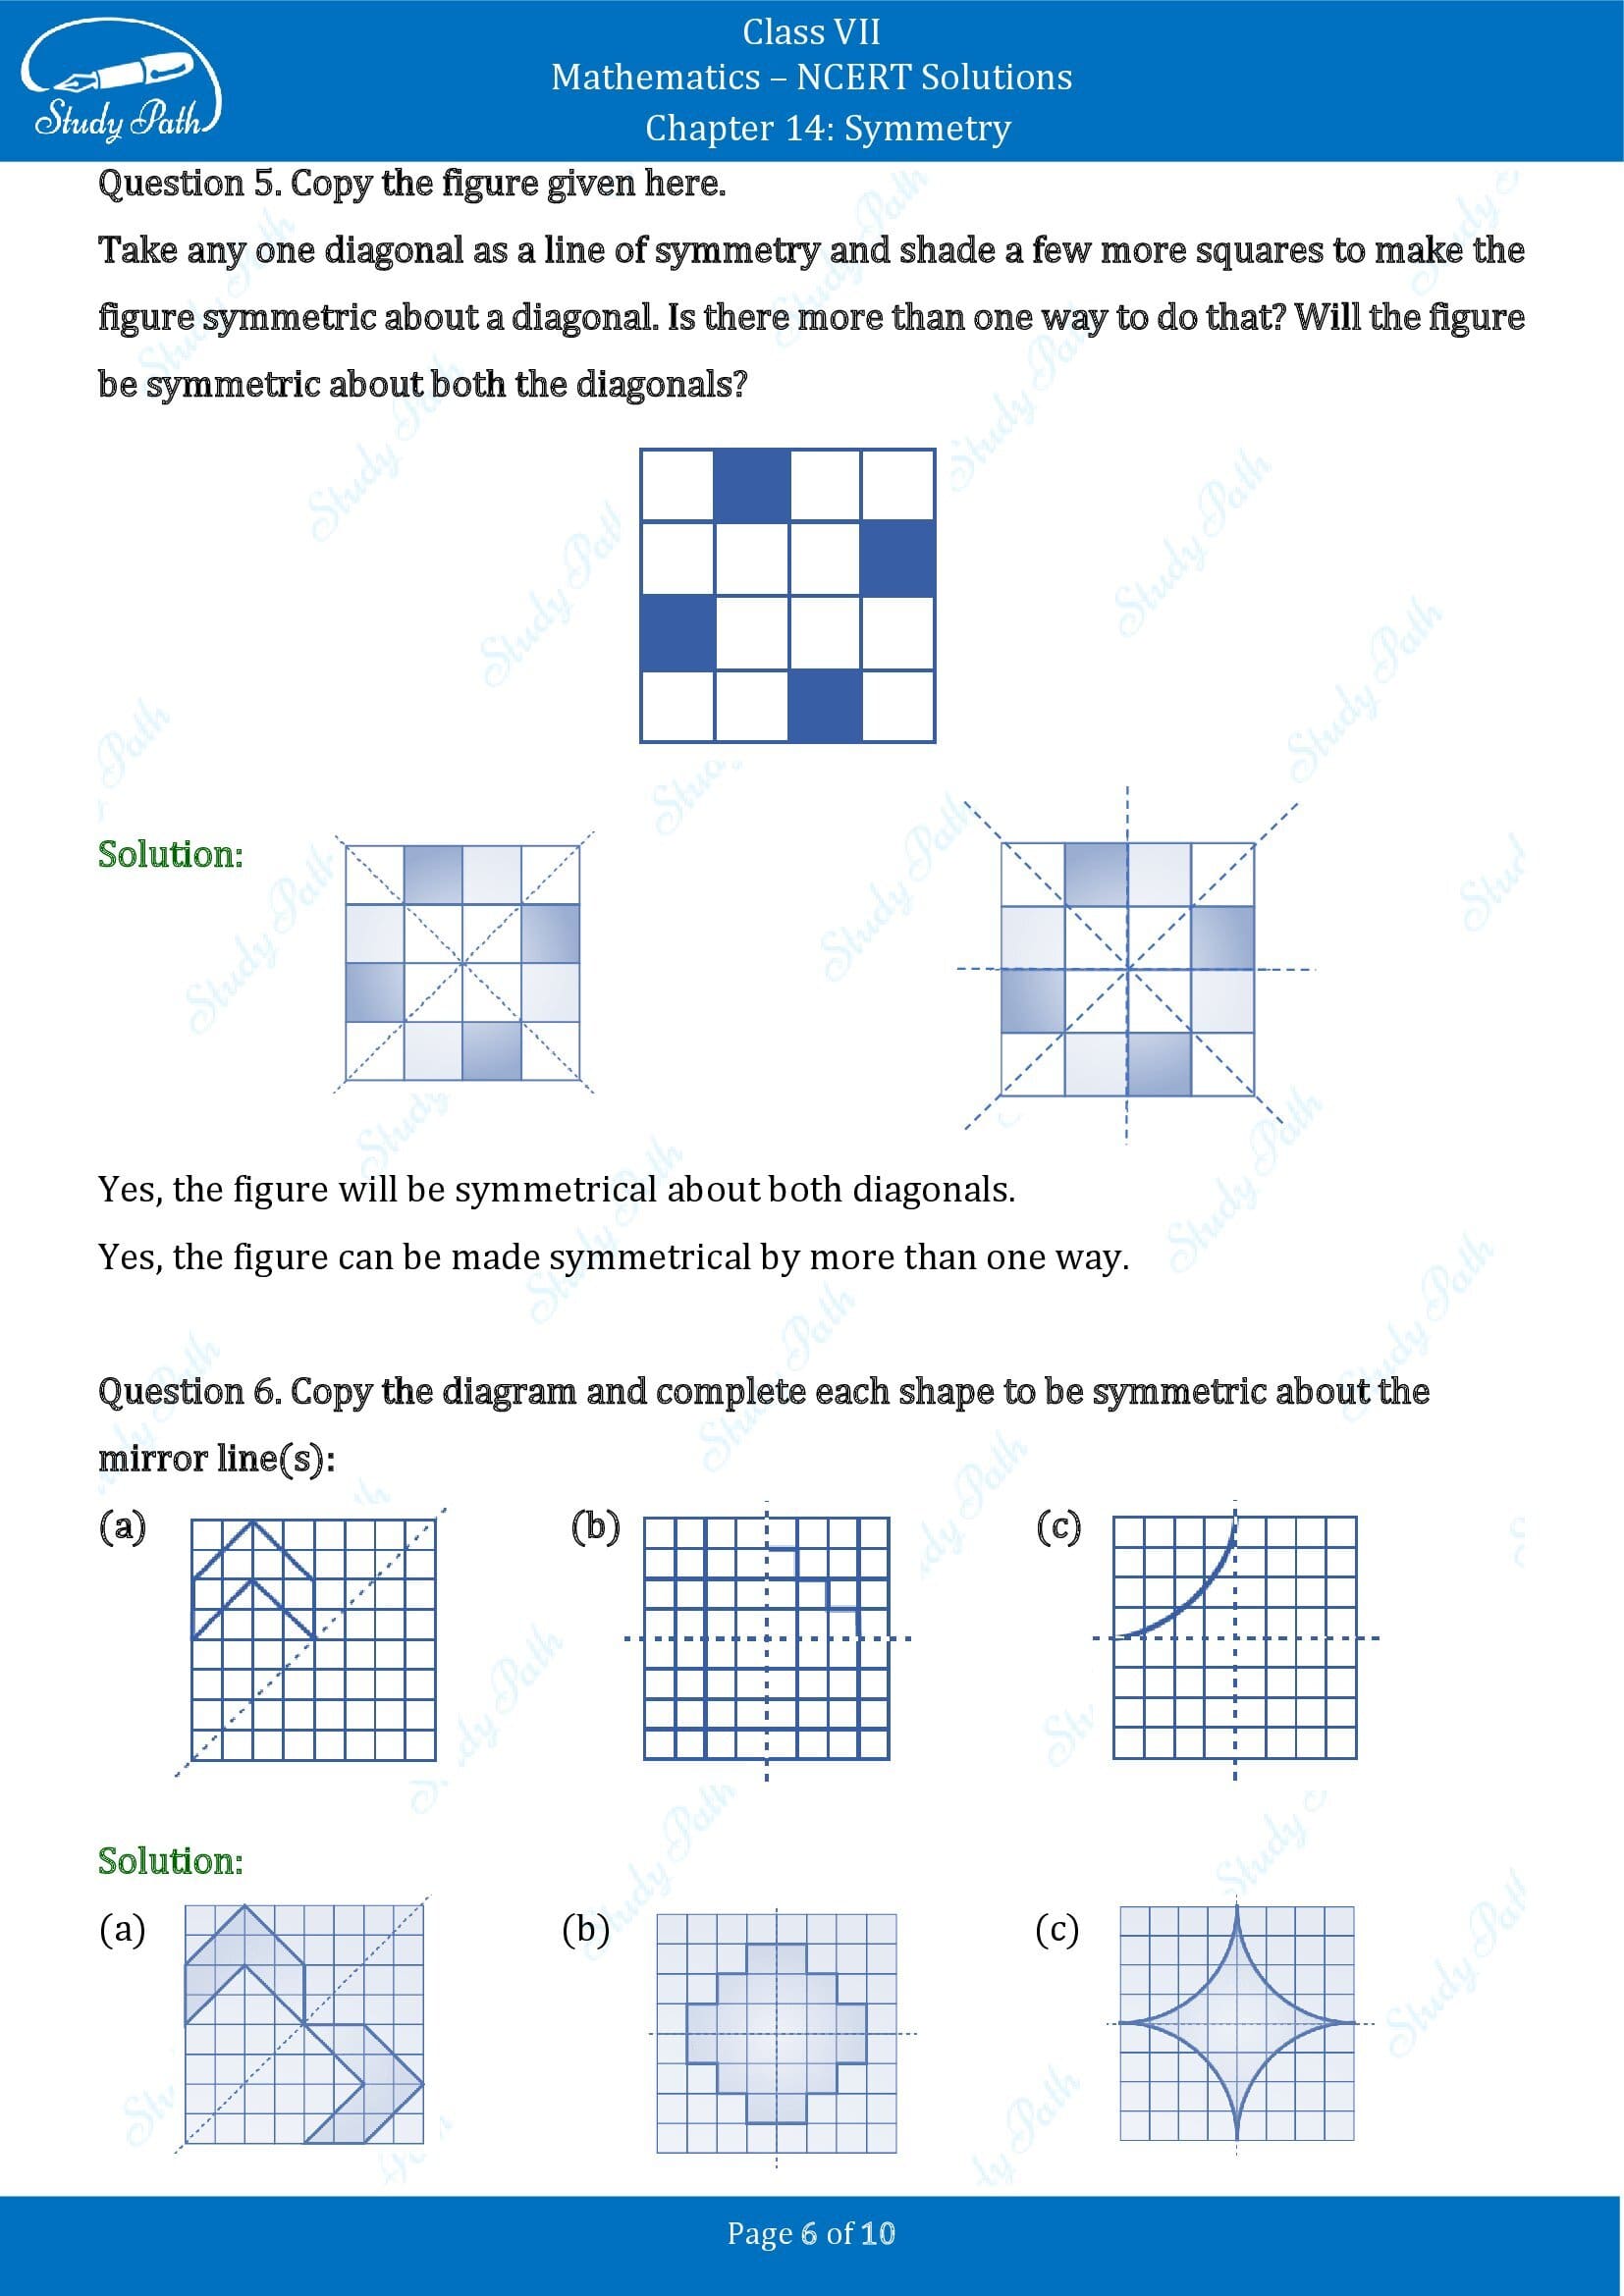 NCERT Solutions for Class 7 Maths Chapter 14 Symmetry Exercise 14.1 00006